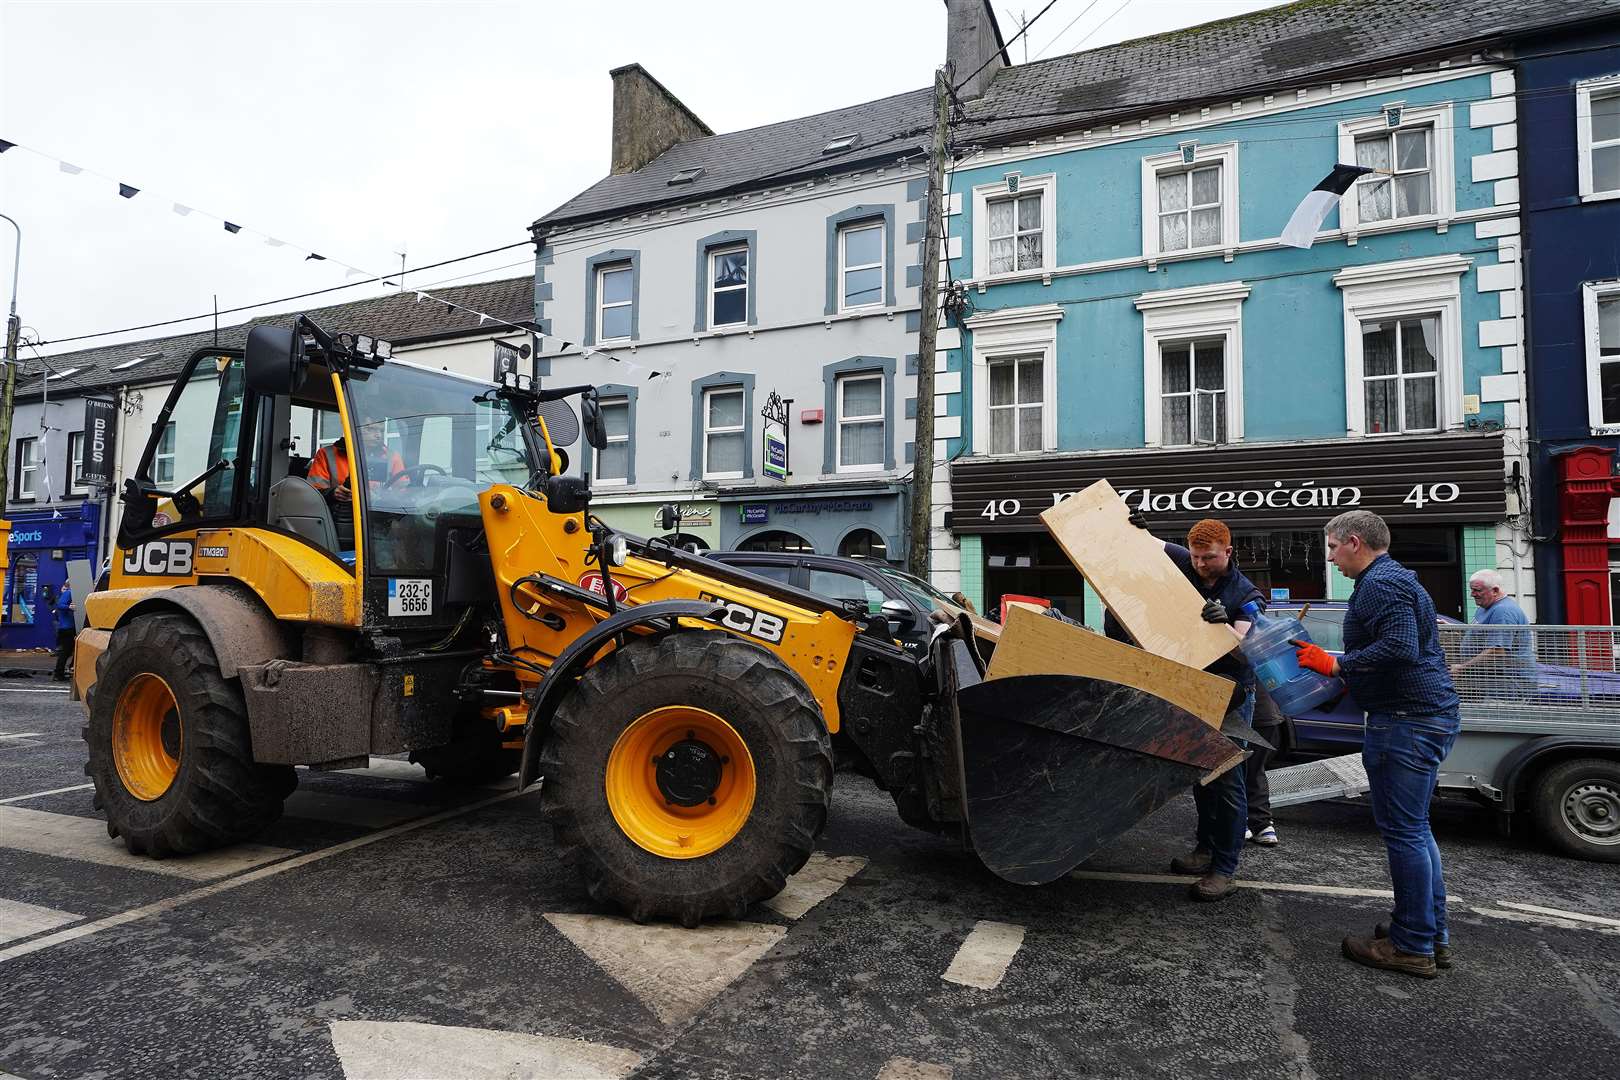 Communities in Co Cork rallied together to help clean up damage caused by flooding (Brian Lawless/PA)